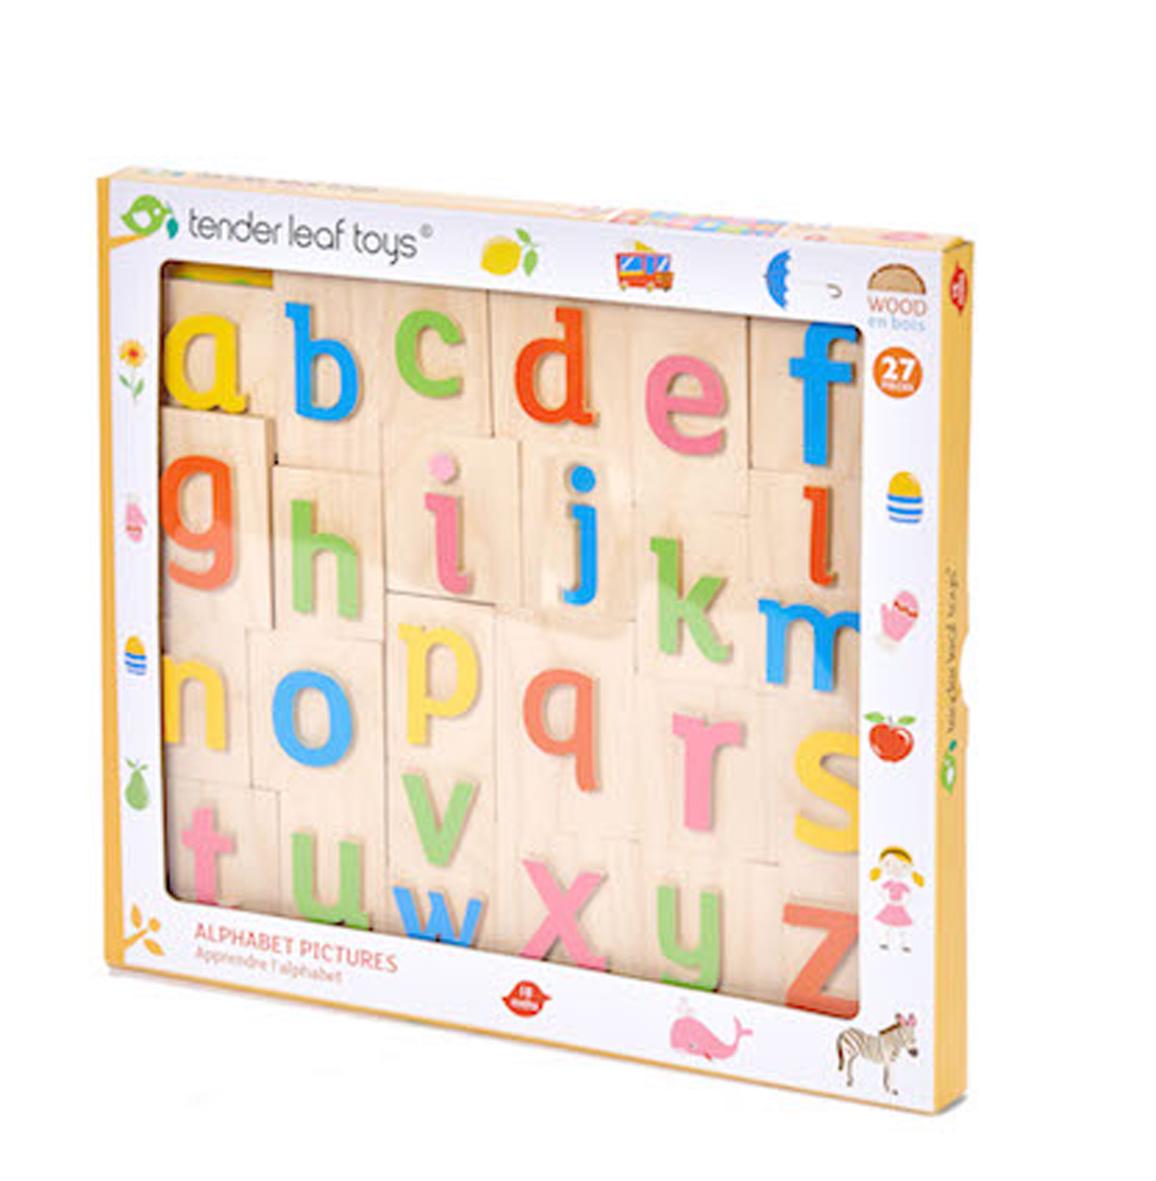 New Wood Alphabet Learning Puzzle with 26 Letters and Images #5